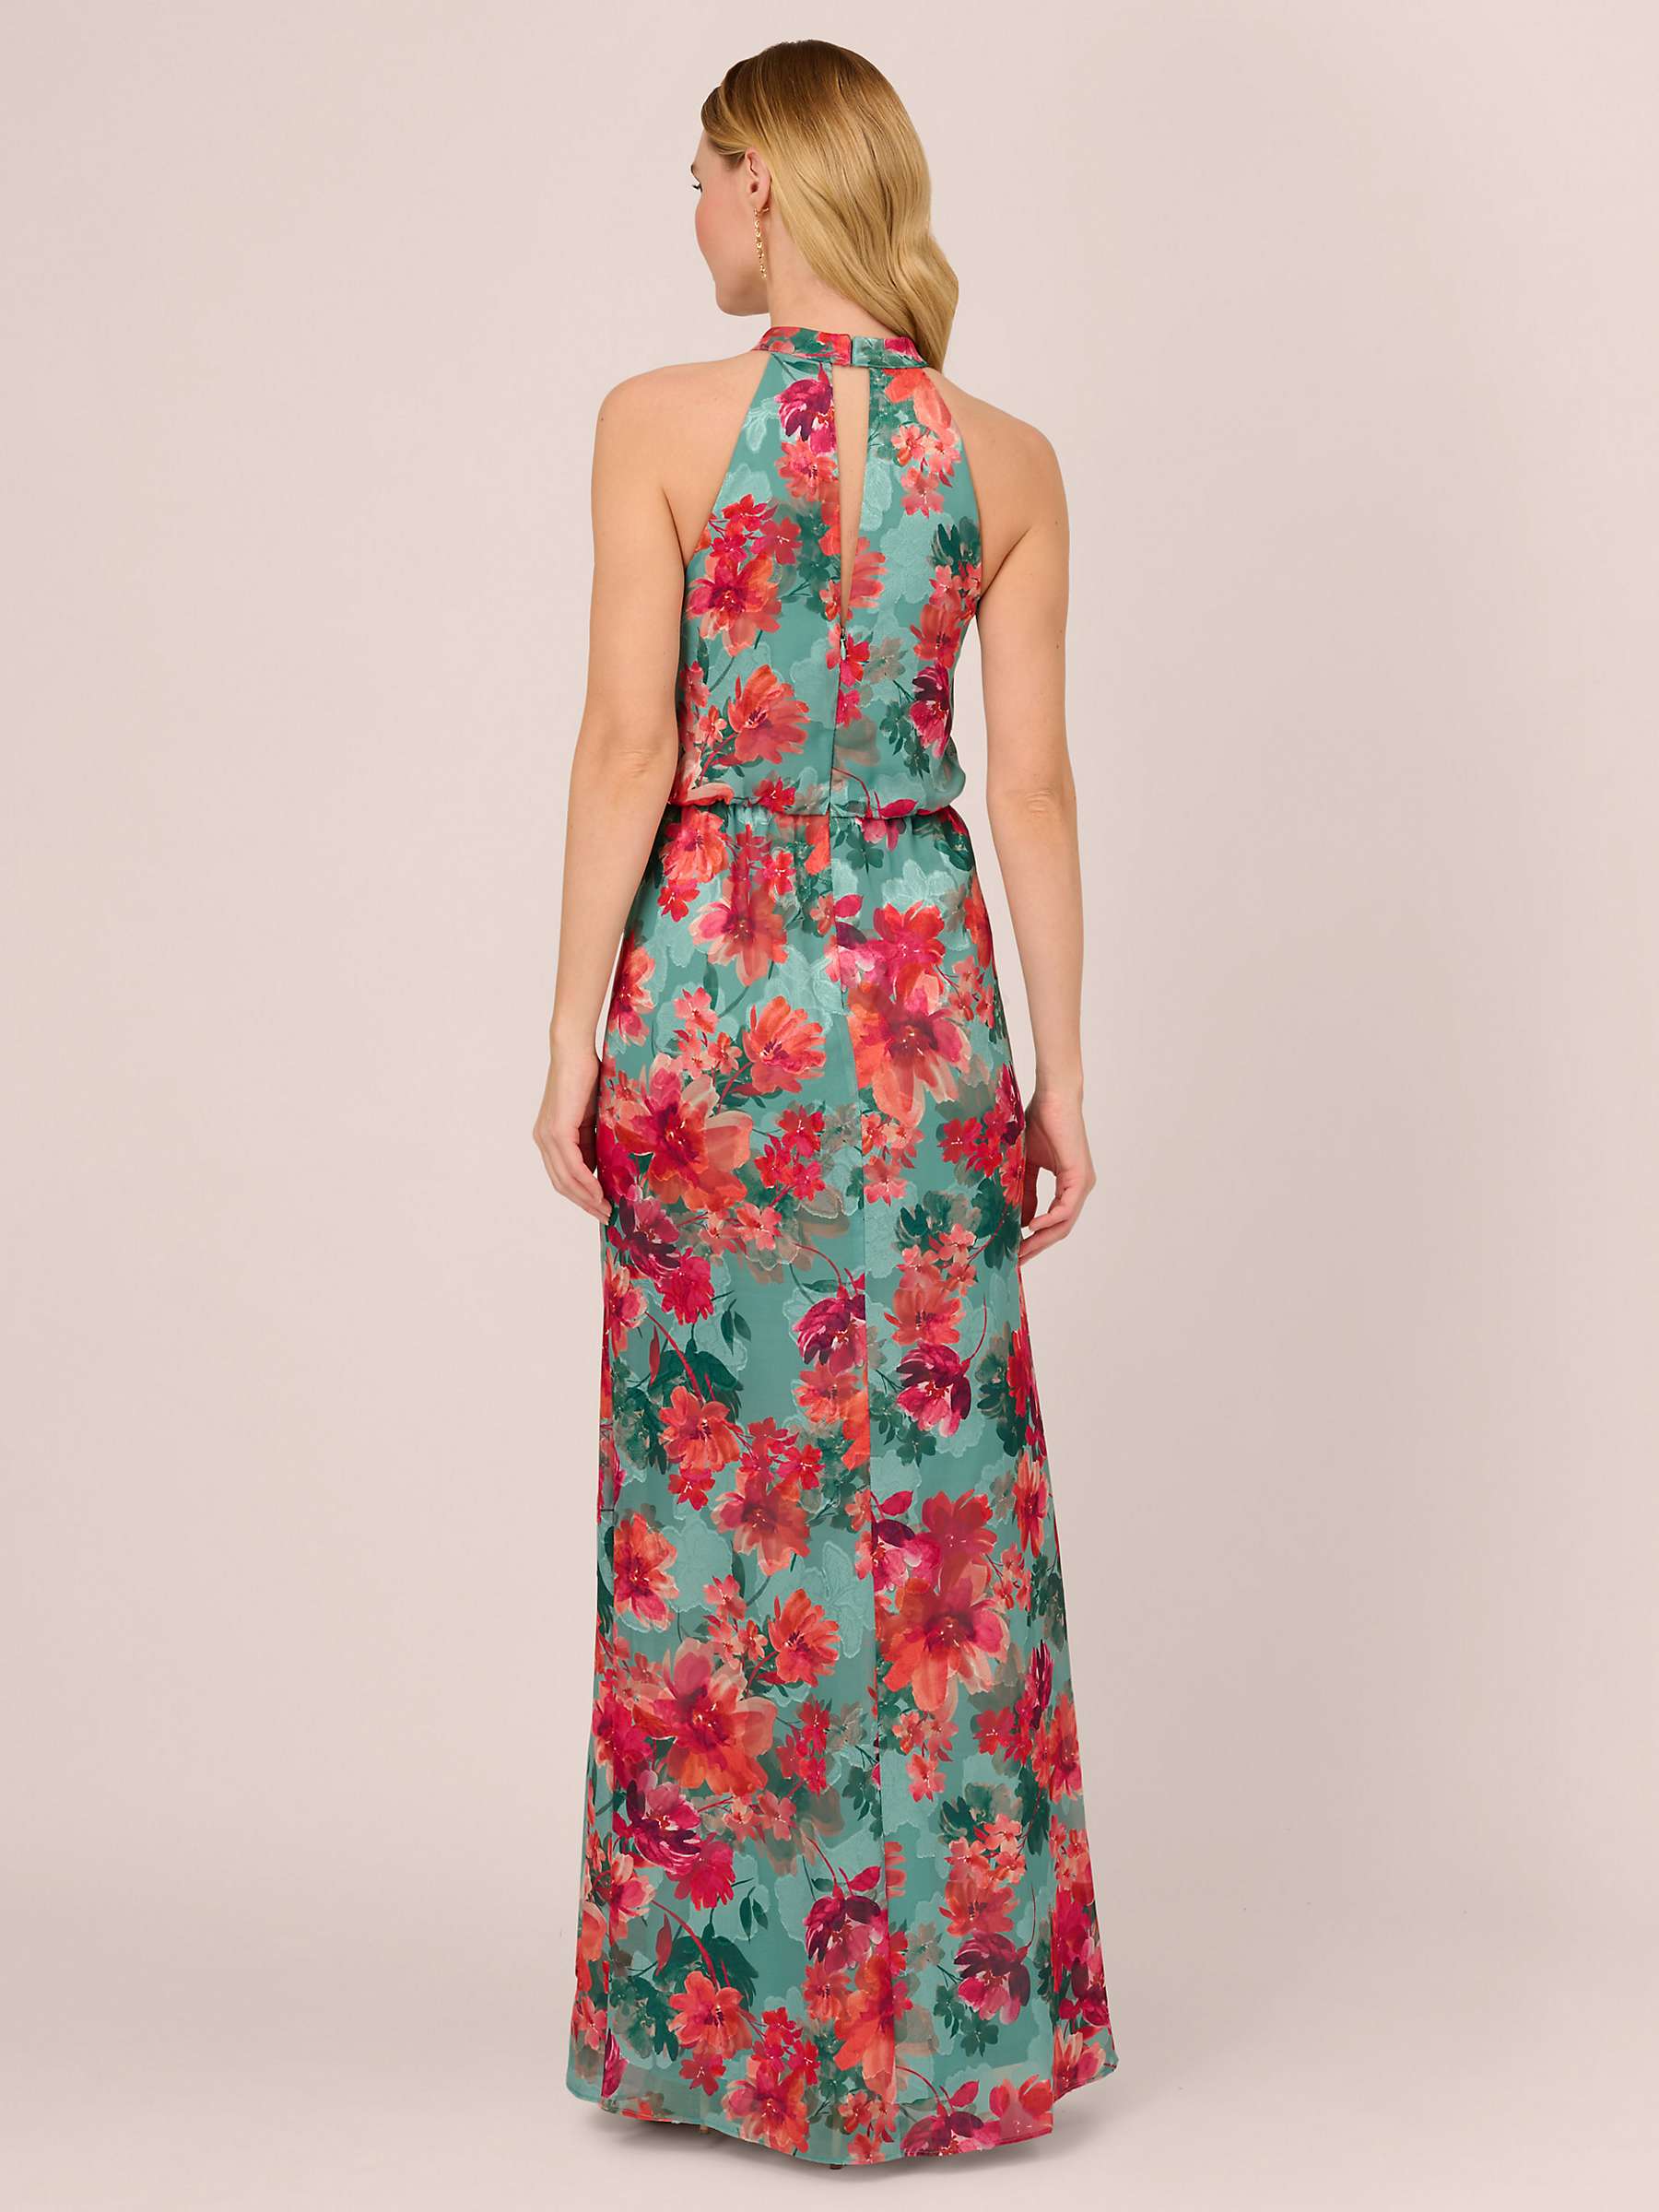 Buy Adrianna Papell Floral Mermaid Maxi Dress, Turquoise/Multi Online at johnlewis.com